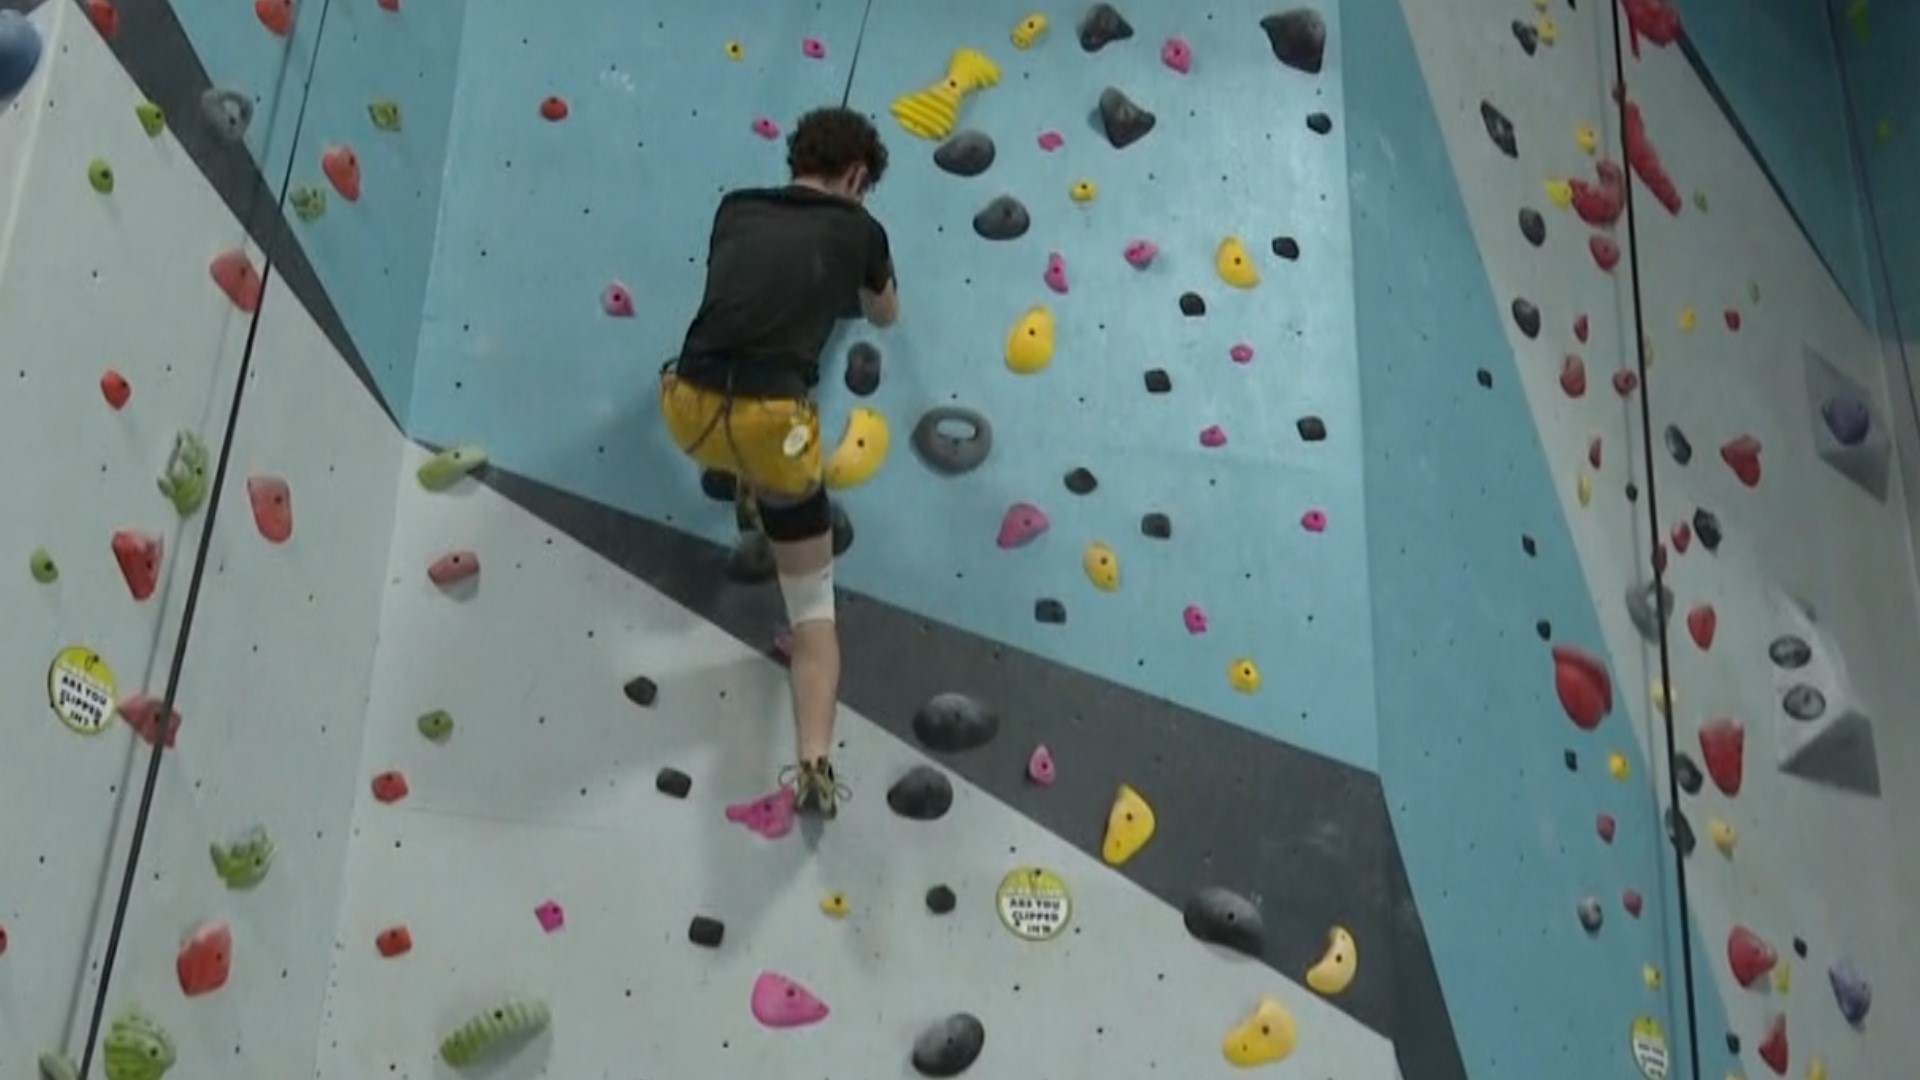 Rock climbing is an outdoor weekend activity for many people, but for 18 year old Dylan Schwartz, it's a path towards the international stag